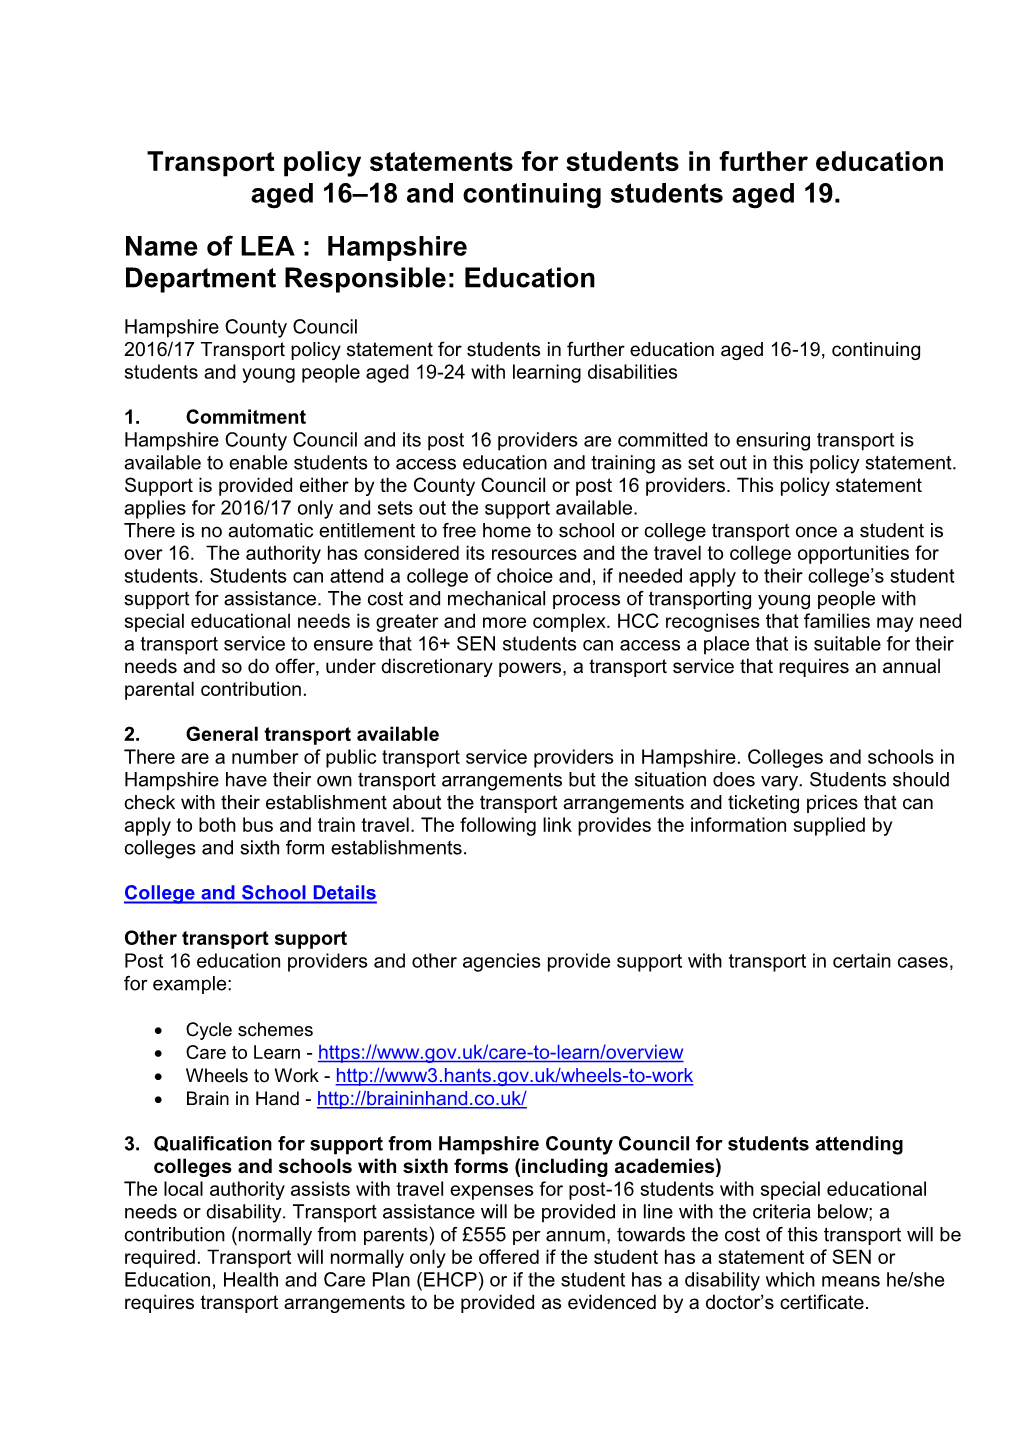 Transport Policy Statements for Students in Further Education Aged 16–18 and Continuing Students Aged 19. Name of LEA : Hamps